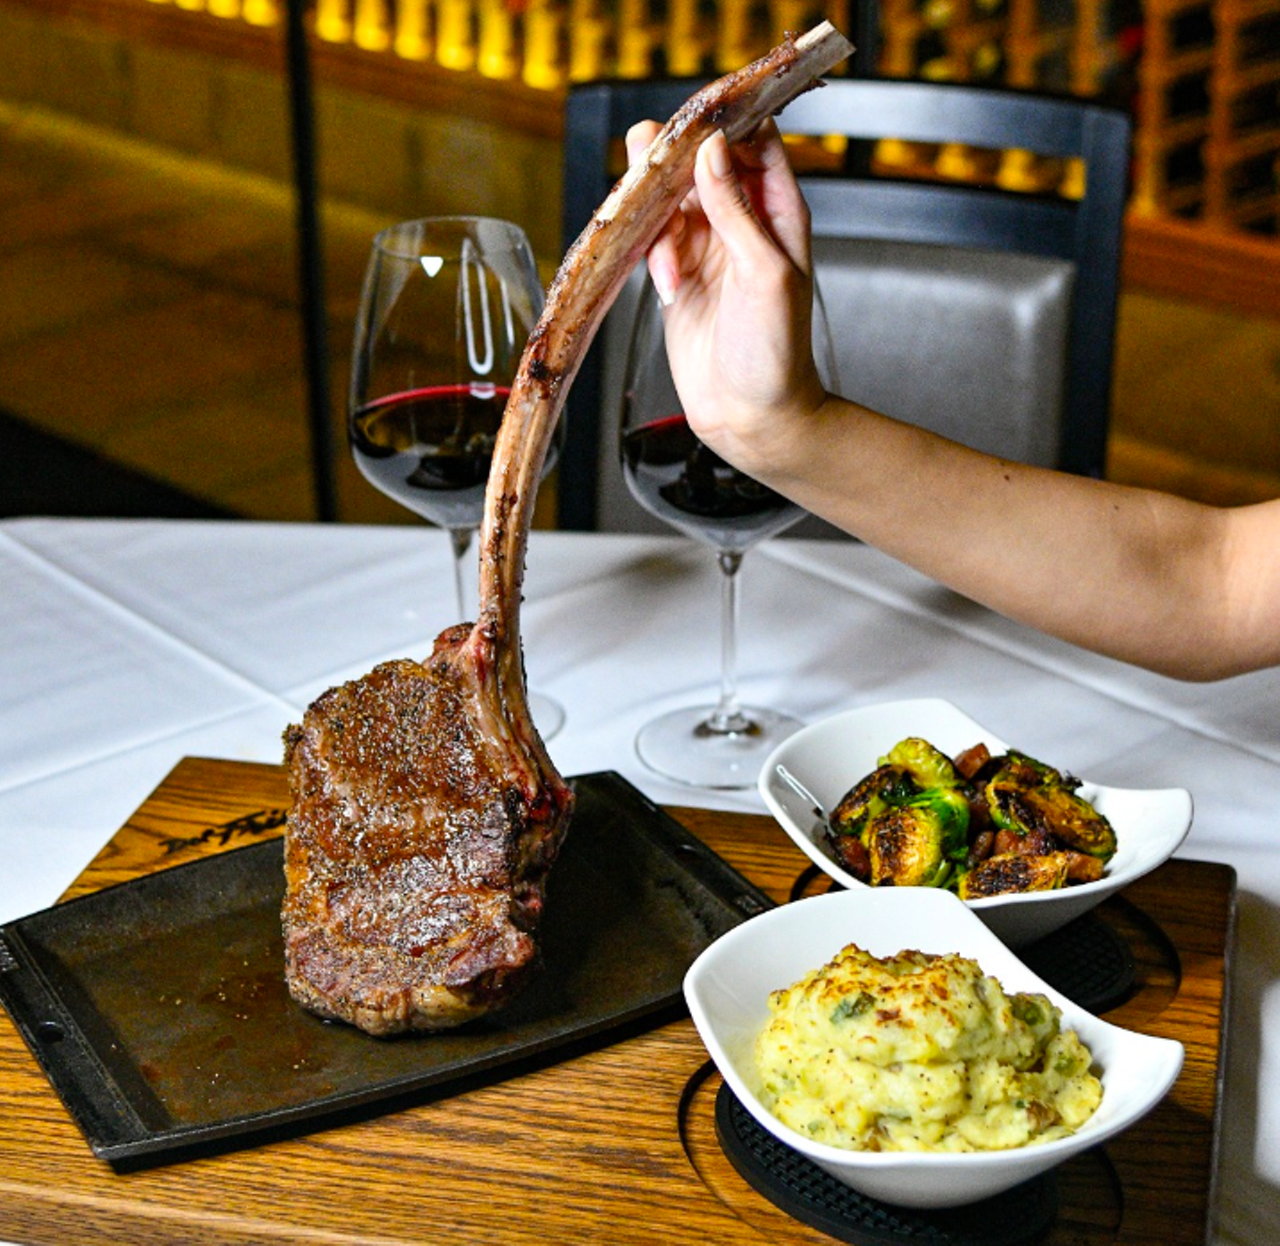 Del Frisco's Double Eagle Steakhouse
9150 International Drive, Orlando
Del Frisco's Double Eagle Steakhouse is a great pick for steak, seafood and traditional classic all-American food.